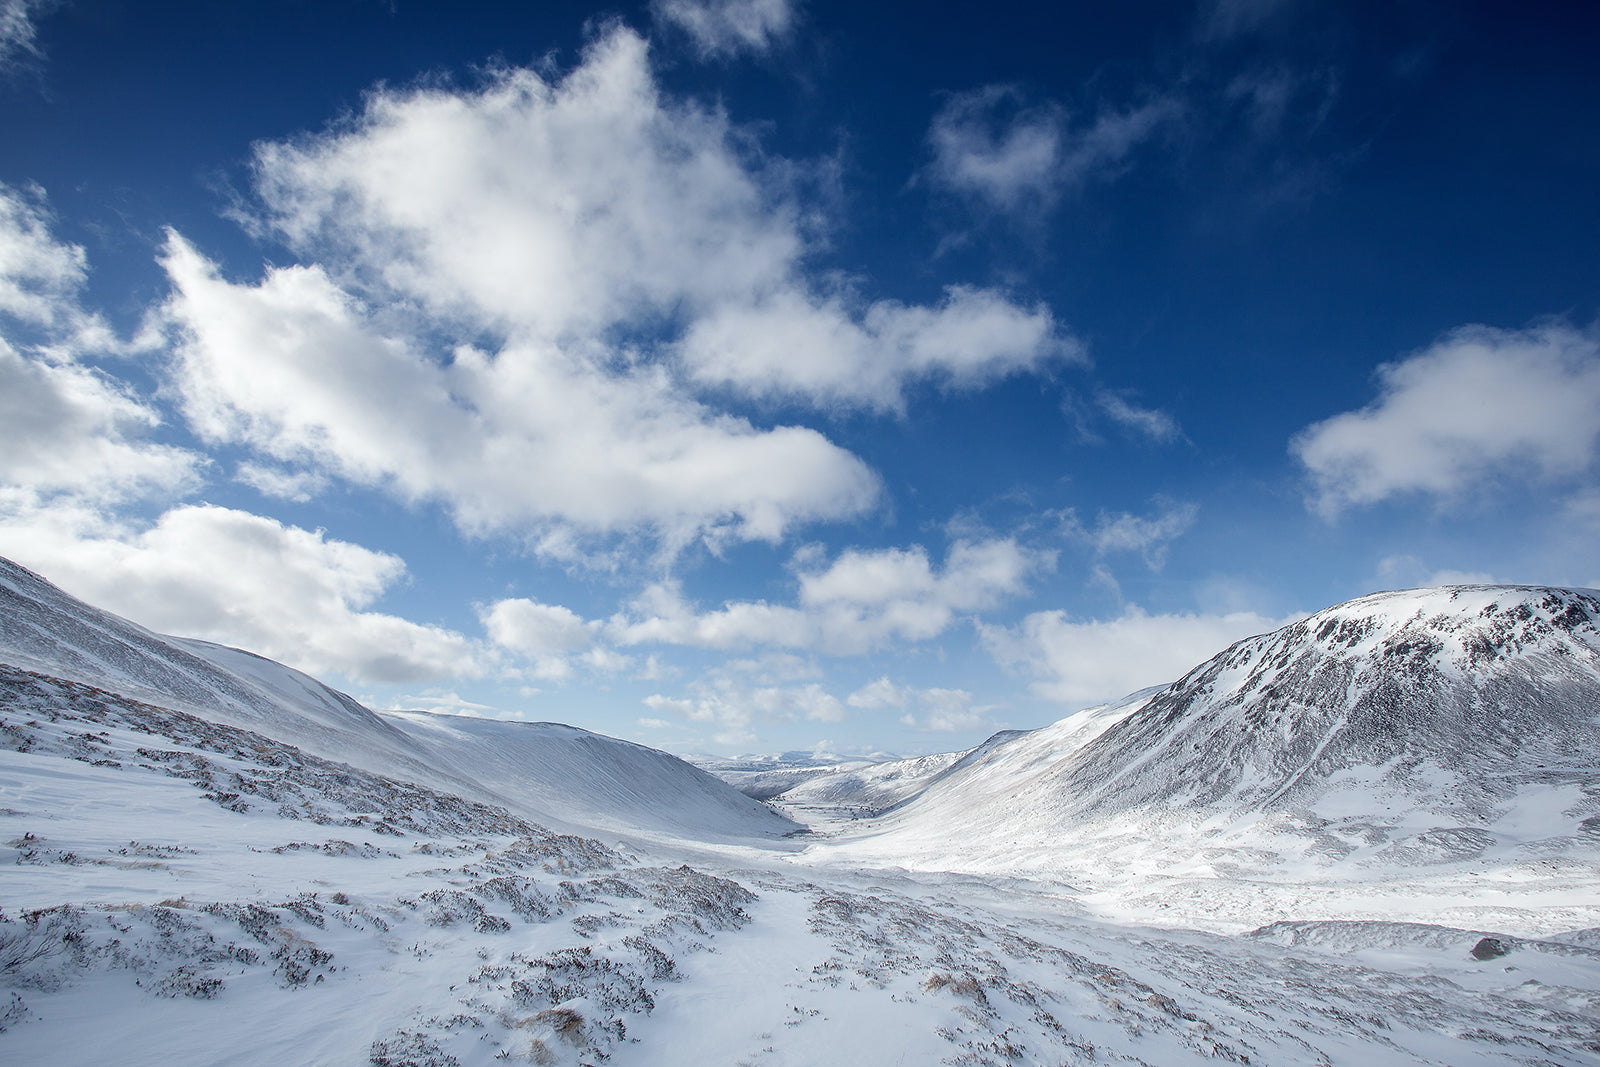 The snowy landscapes of the Cairngorms